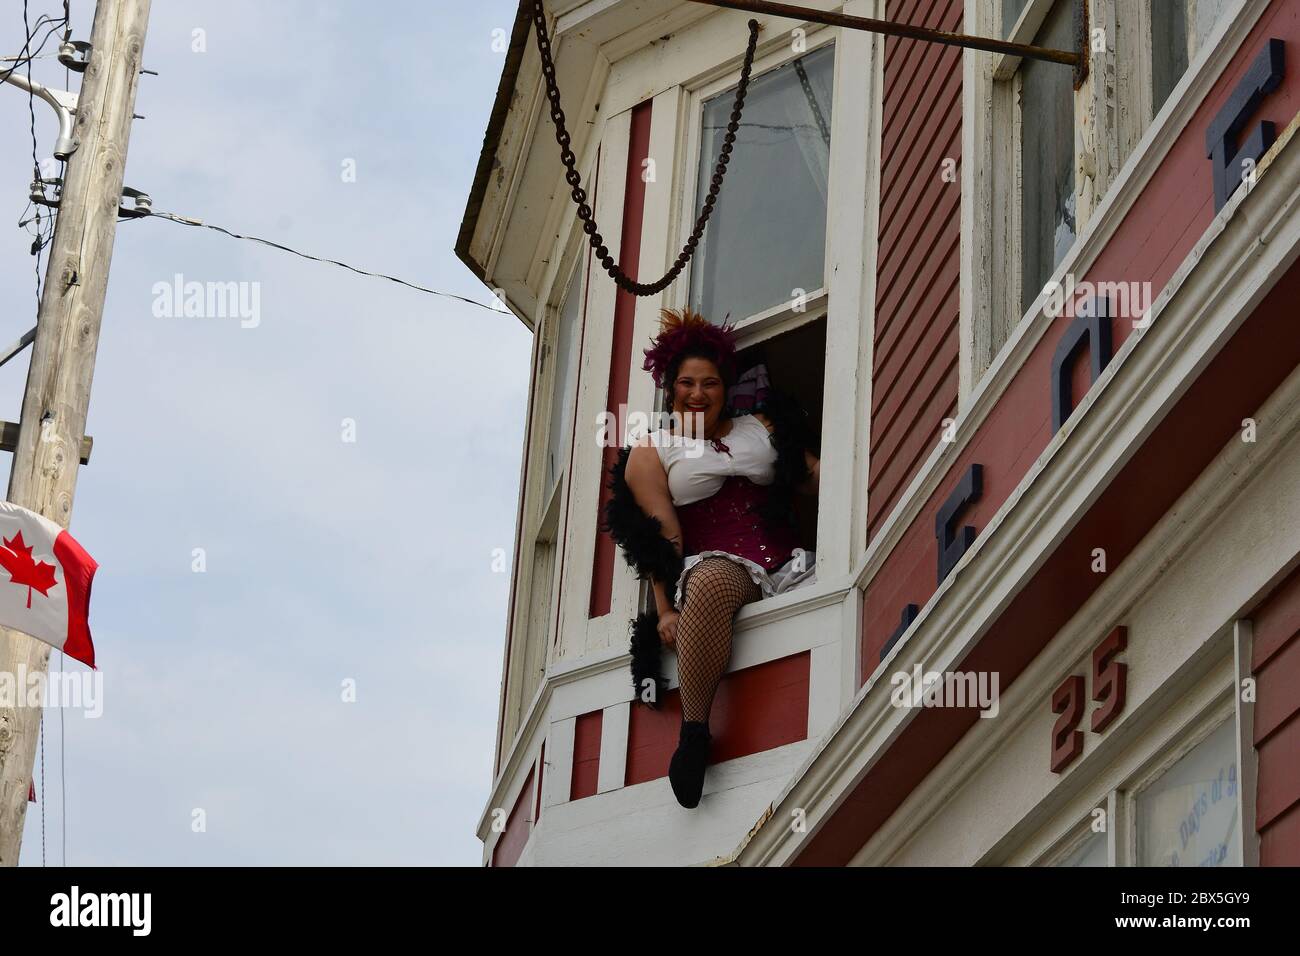 A dance hall girl, from the Home to the Days of 98 show, all about Jefferson Randolf 'Soapy' Smith, The Historic Eagles hall, Skagway, Alaska, USA, Au Stock Photo